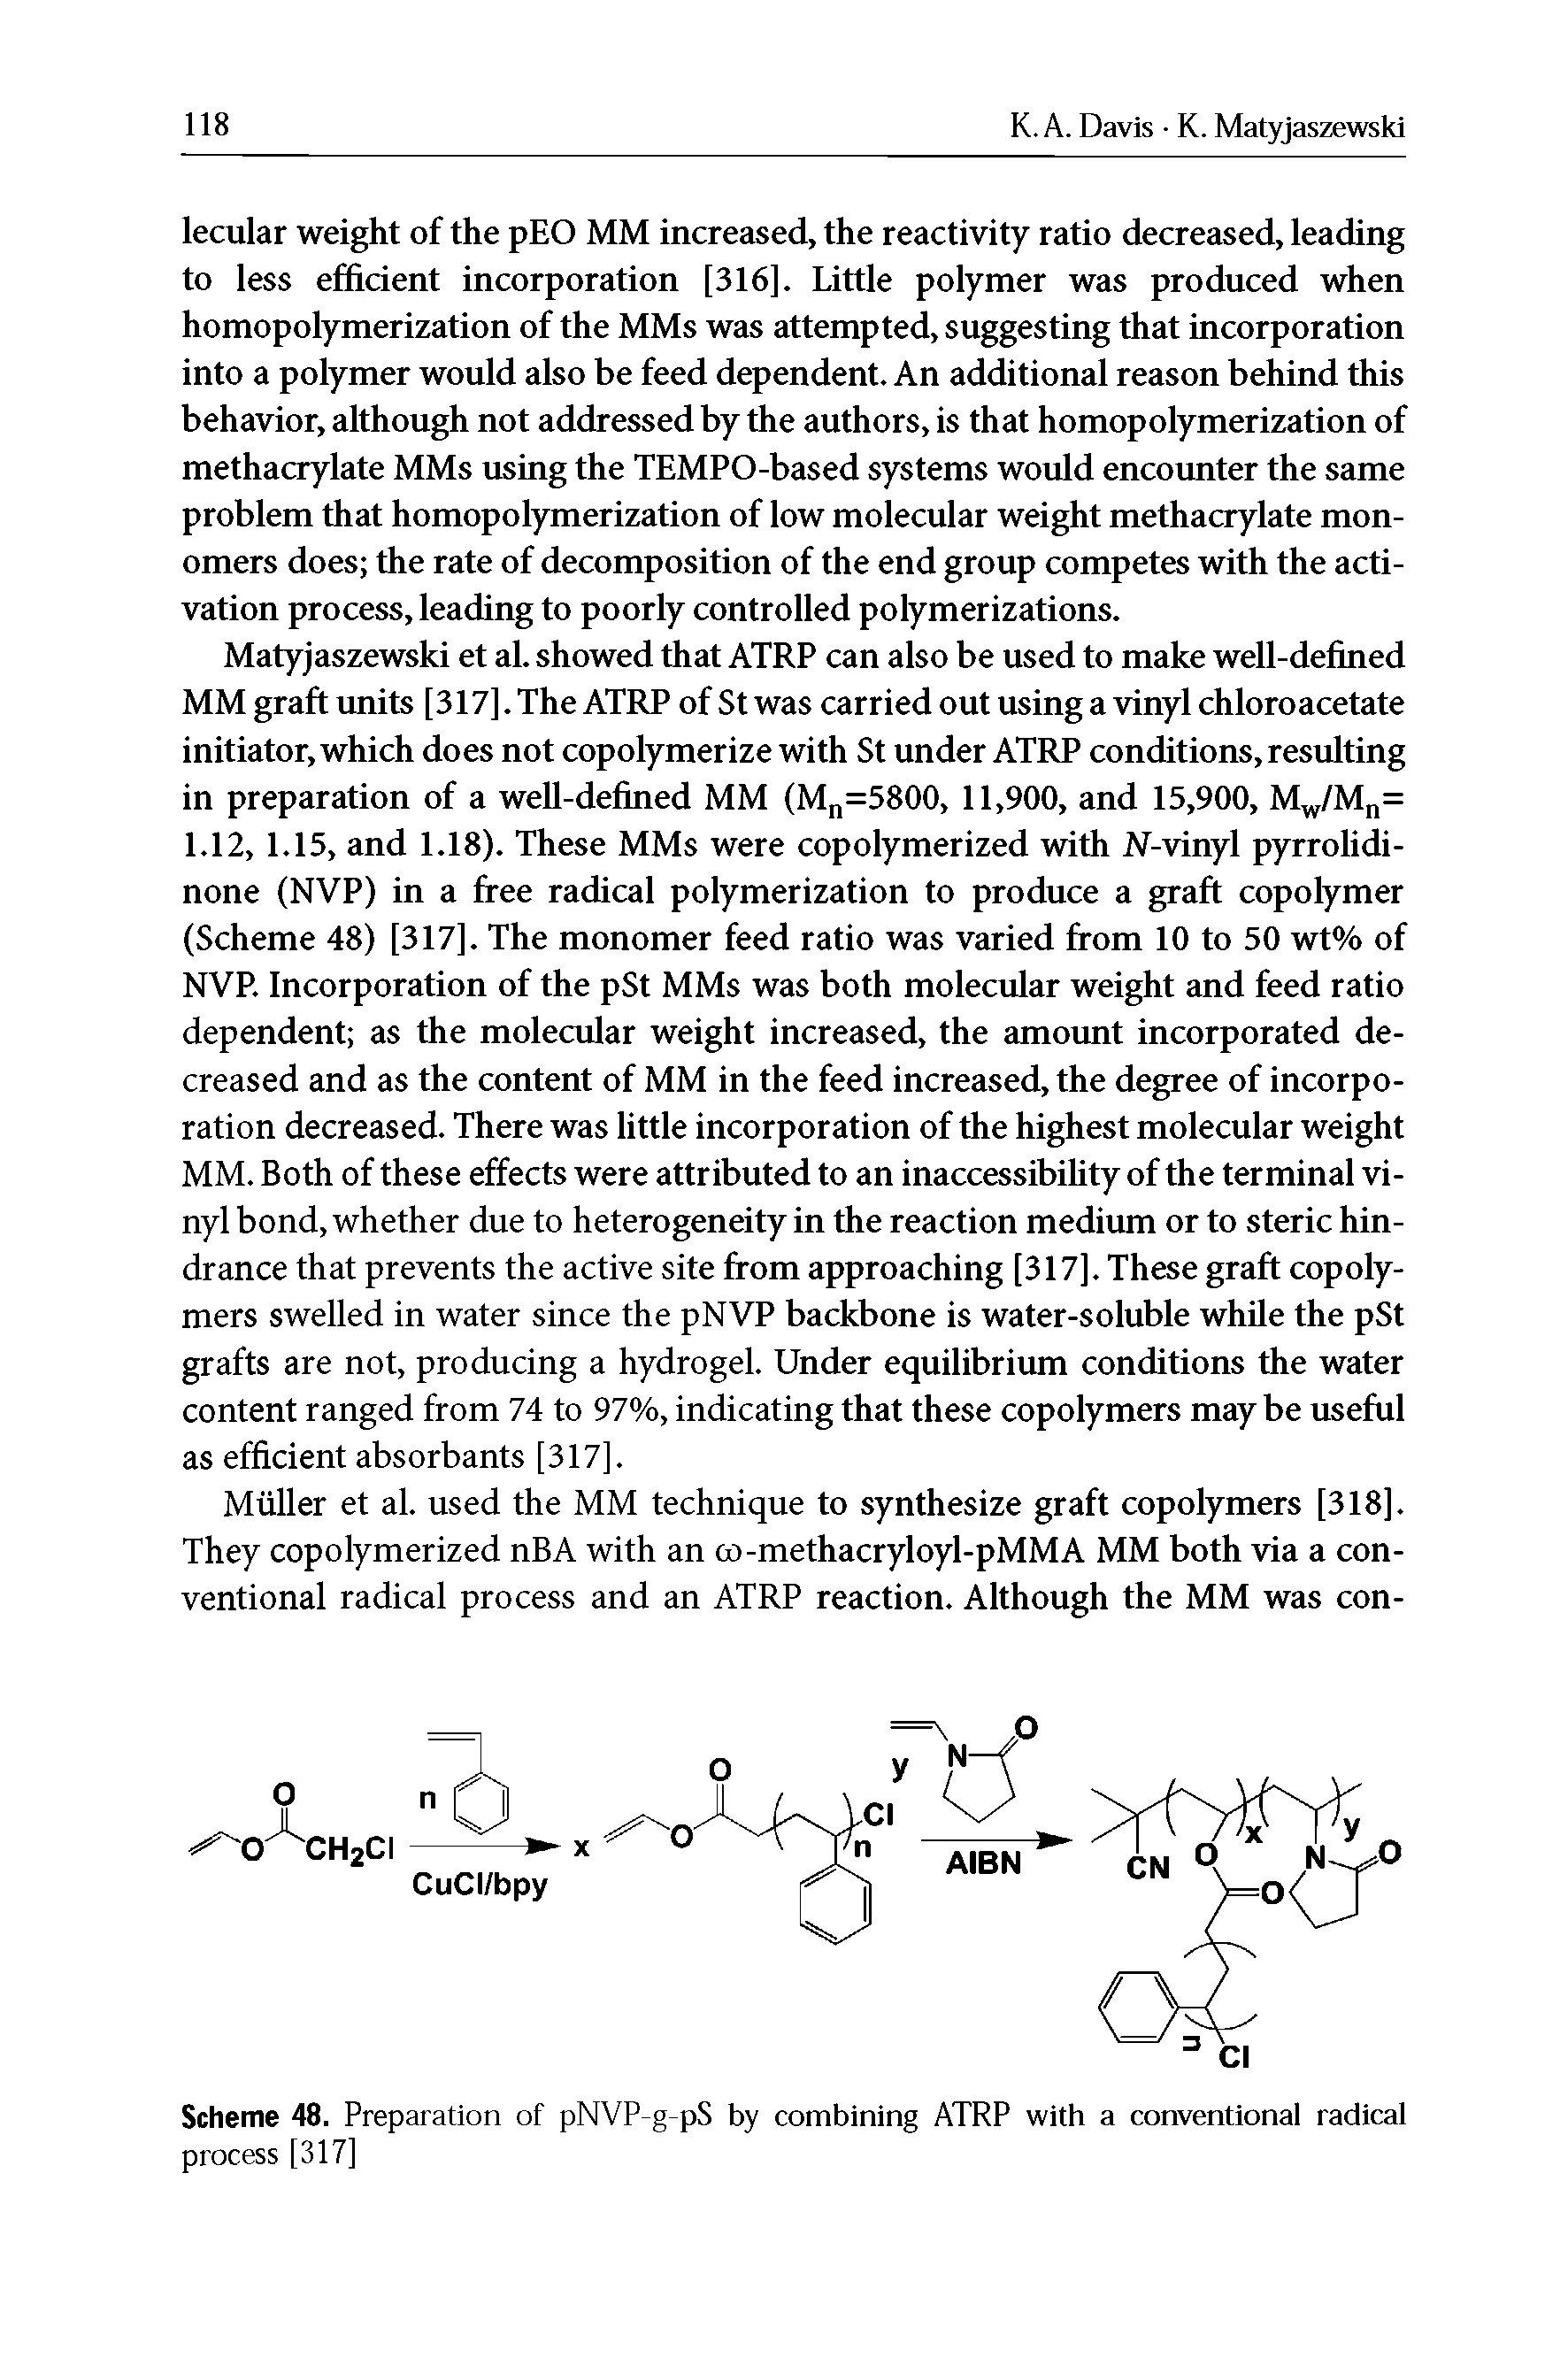 Scheme 48. Preparation of pNVP-g-pS by combining ATRP with a conventional radical process [317]...